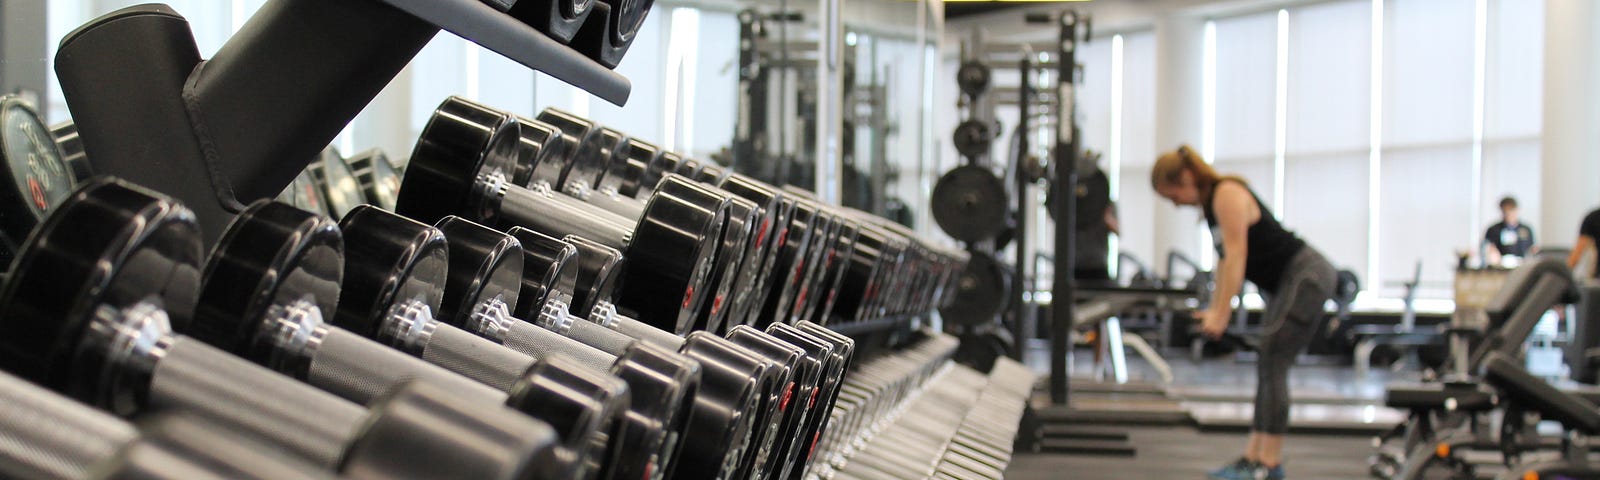 A photograph of a gym. In the foreground is a closeup of a rack of barbells, and in the background is a woman lifting weights.